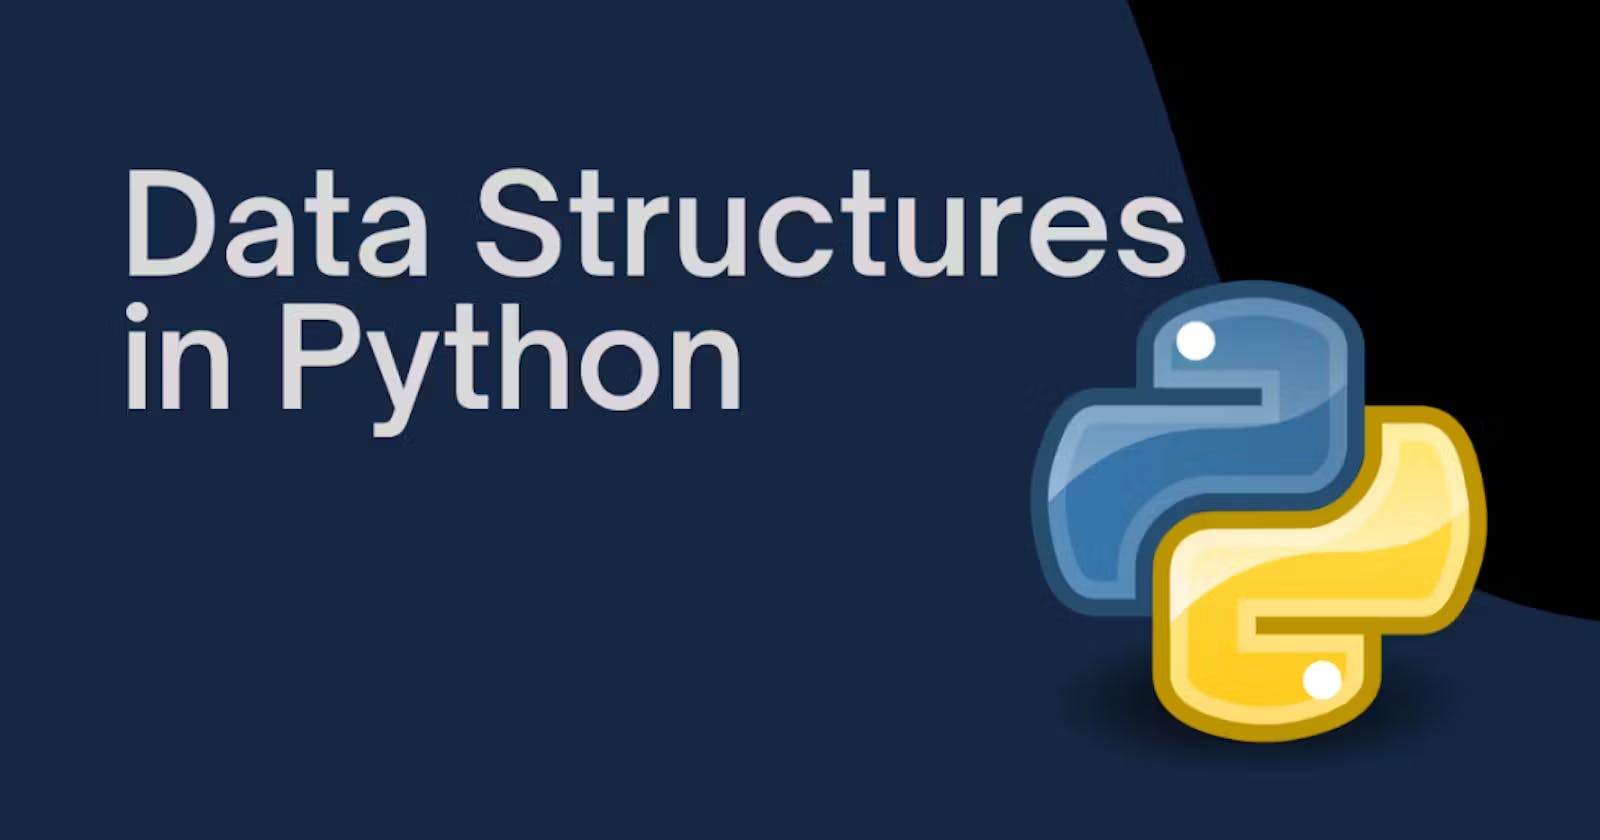 Day 14 :-  Python Data Types and Data Structures 
                          for DevOps.